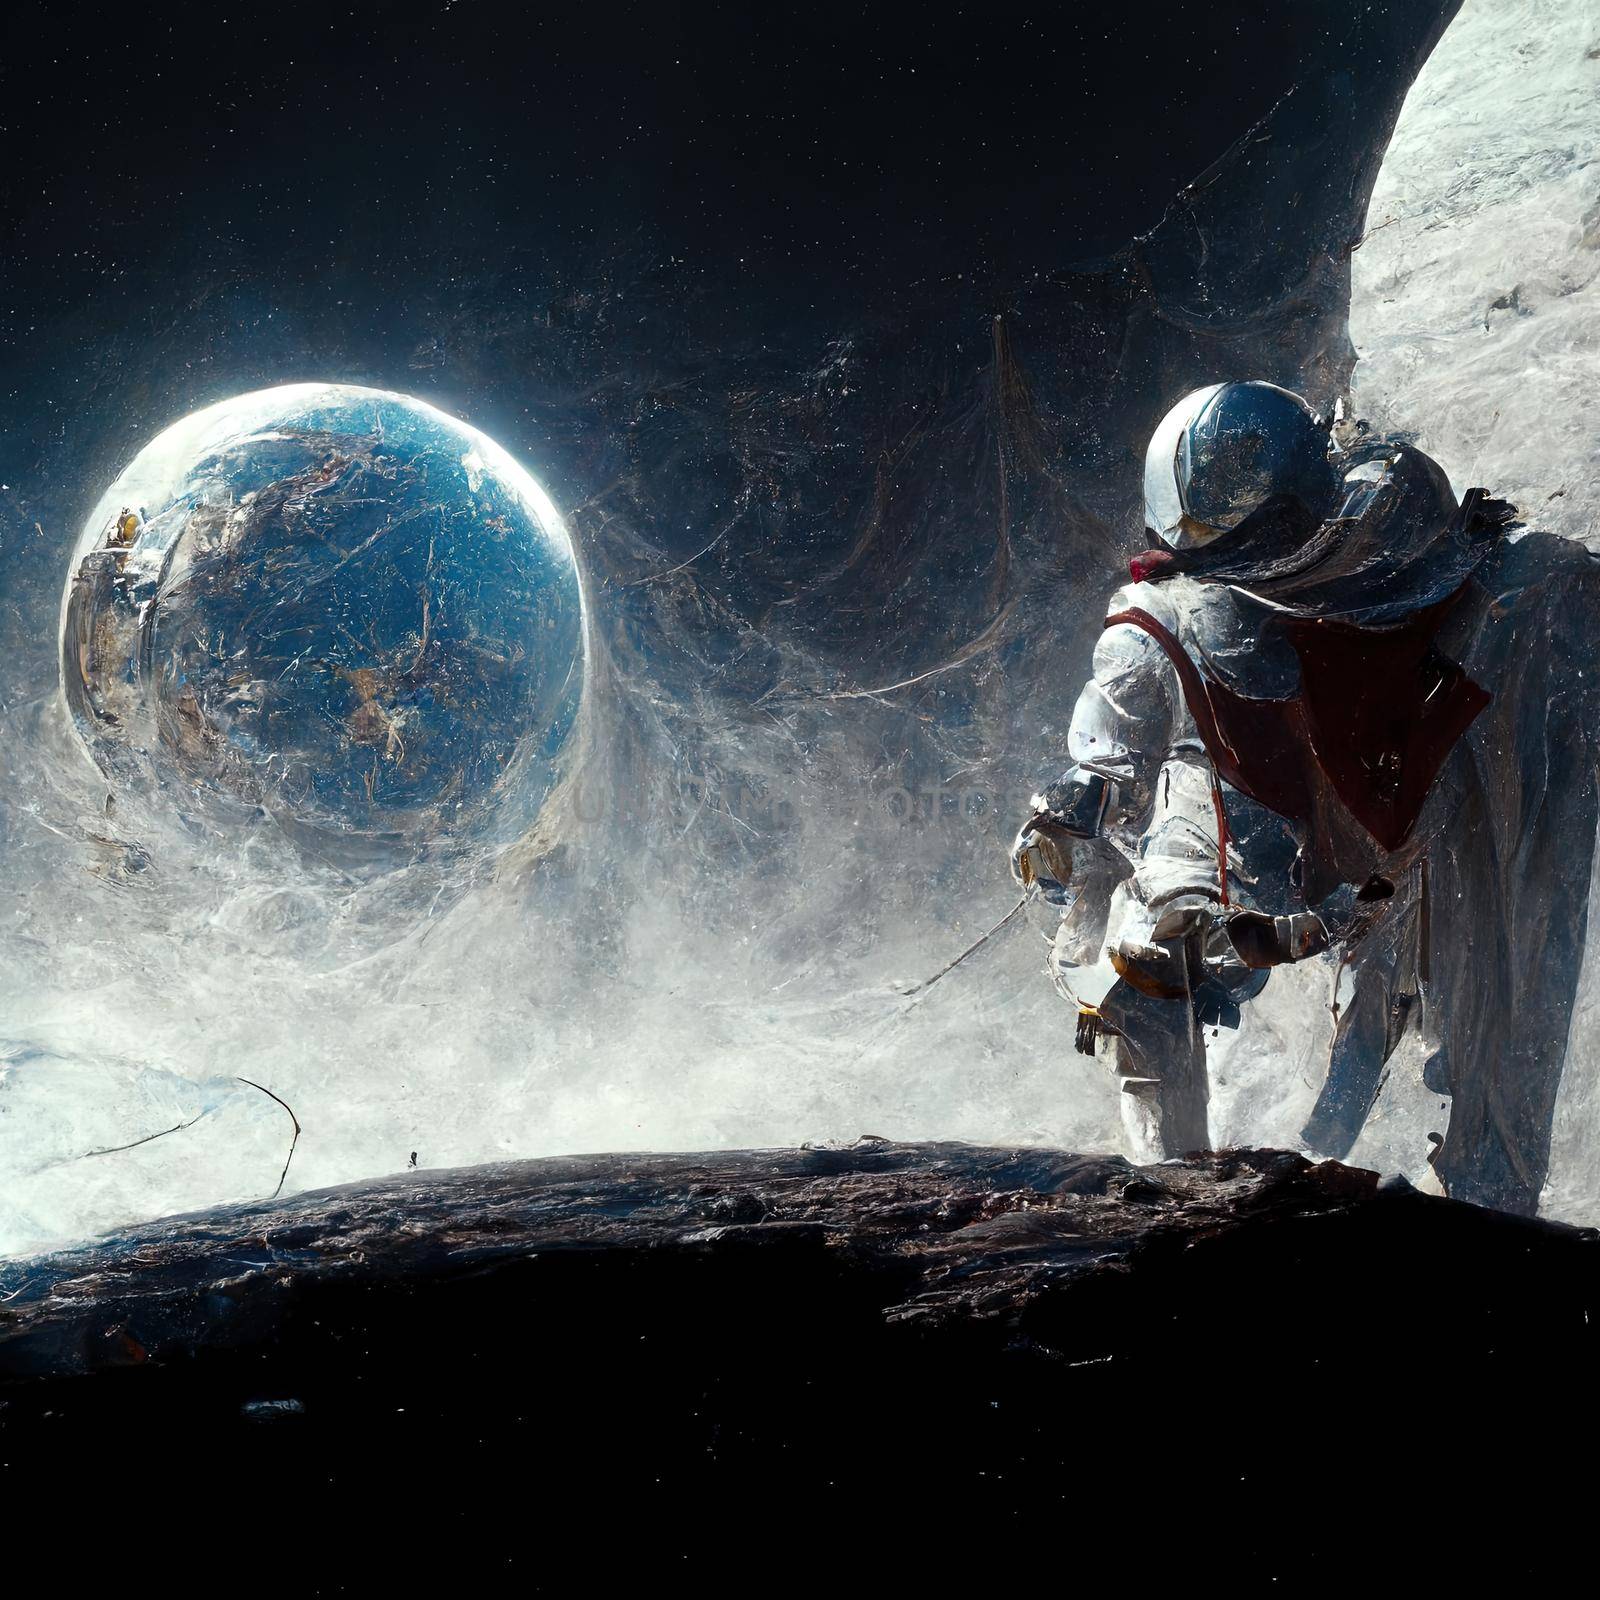 Astronaut, spacewalk on the Moon surface watching planet Earth from space. by 2ragon